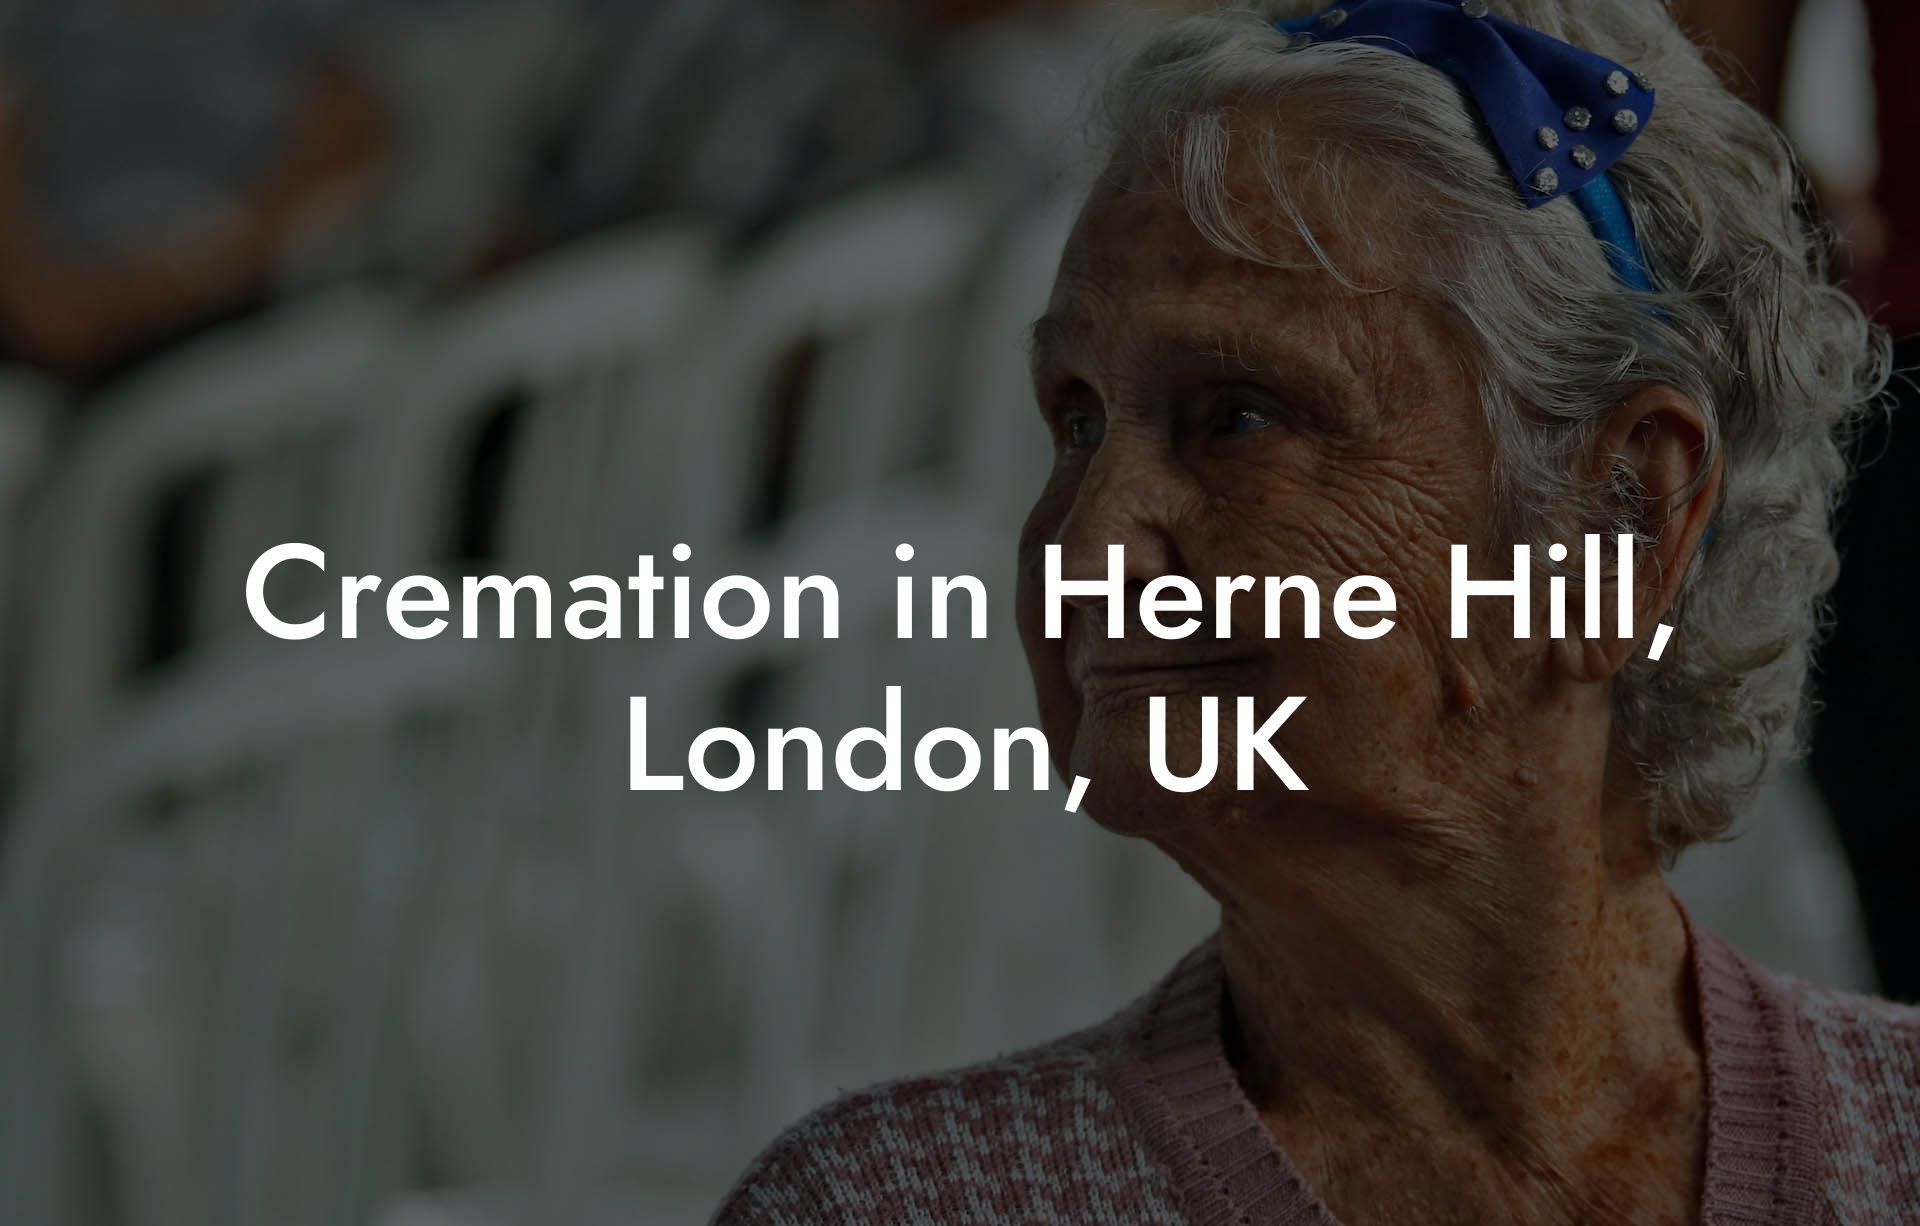 Cremation in Herne Hill, London, UK